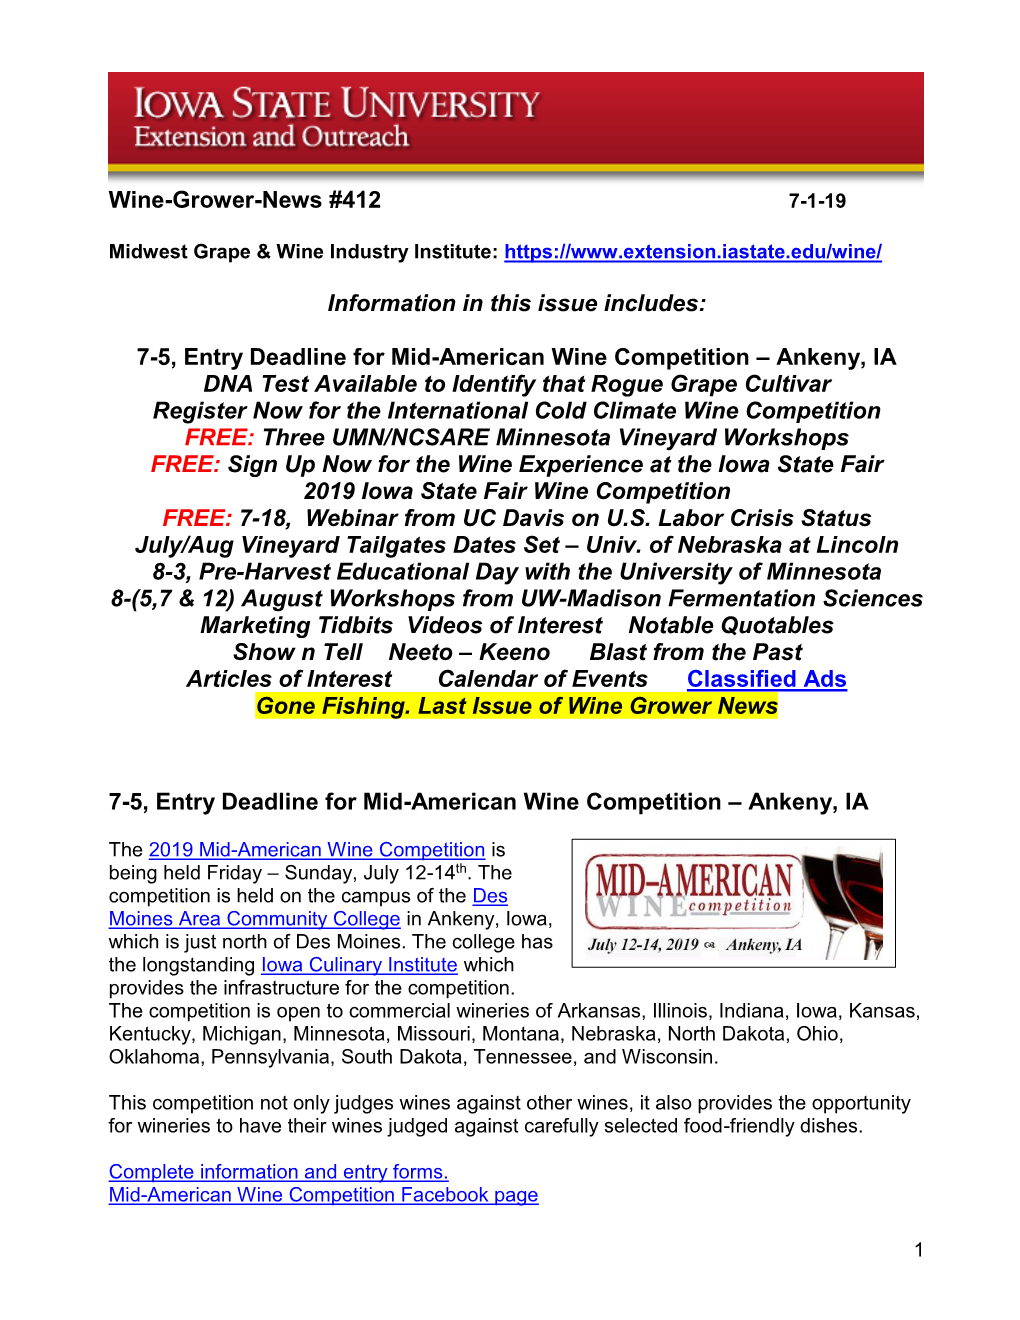 7-5, Entry Deadline for Mid-American Wine Competition – Ankeny